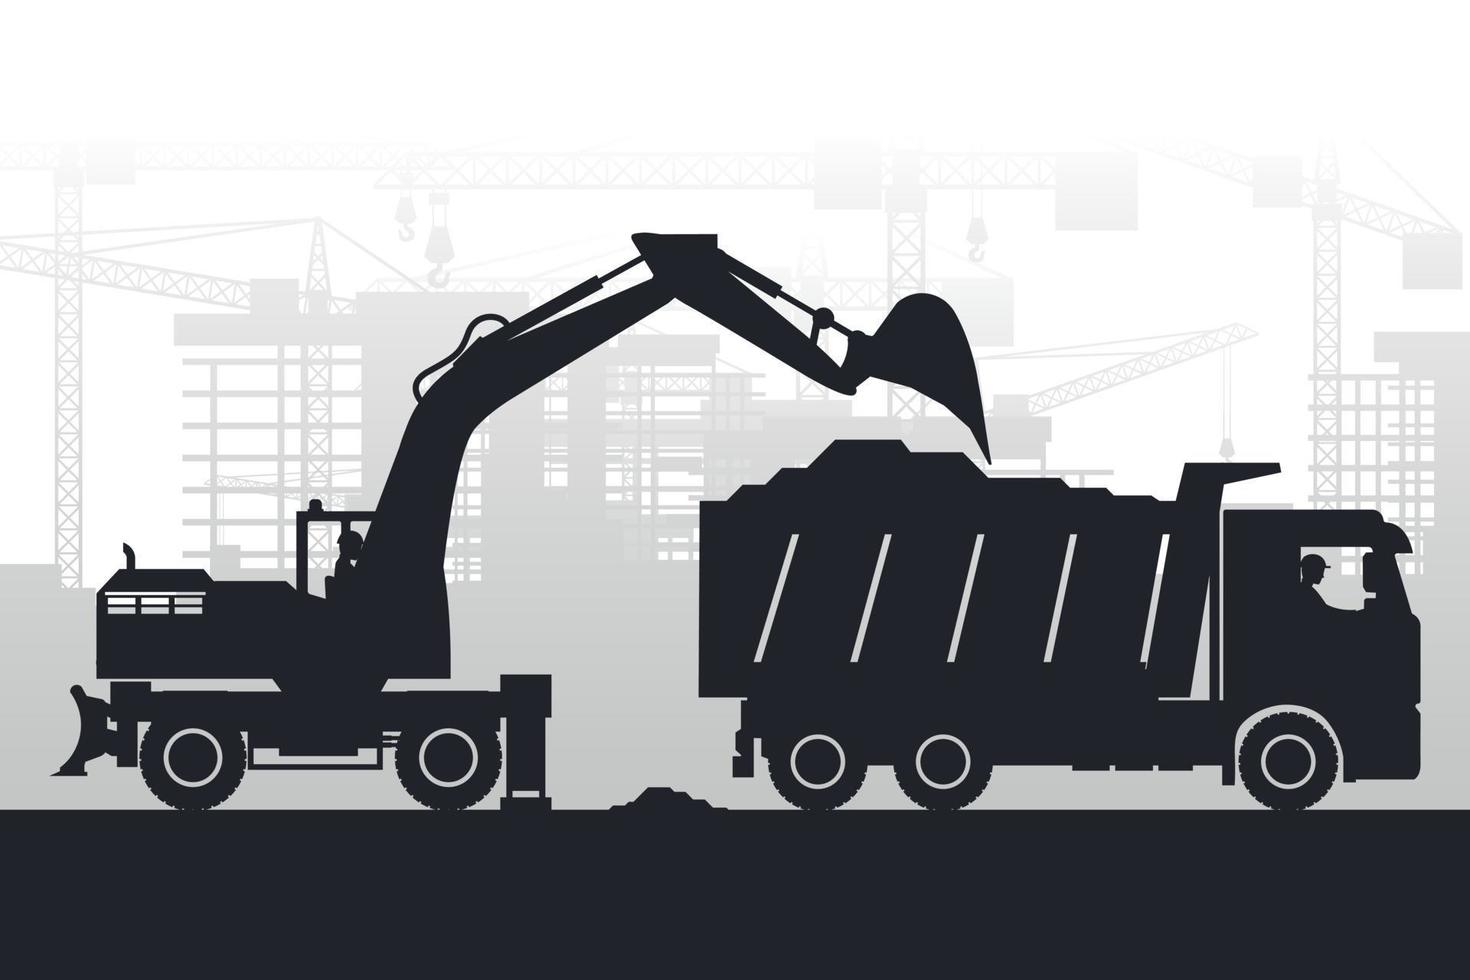 City background with buildings under construction and silhouettes of heavy machinery with wheeled excavator filling a truck with materials vector